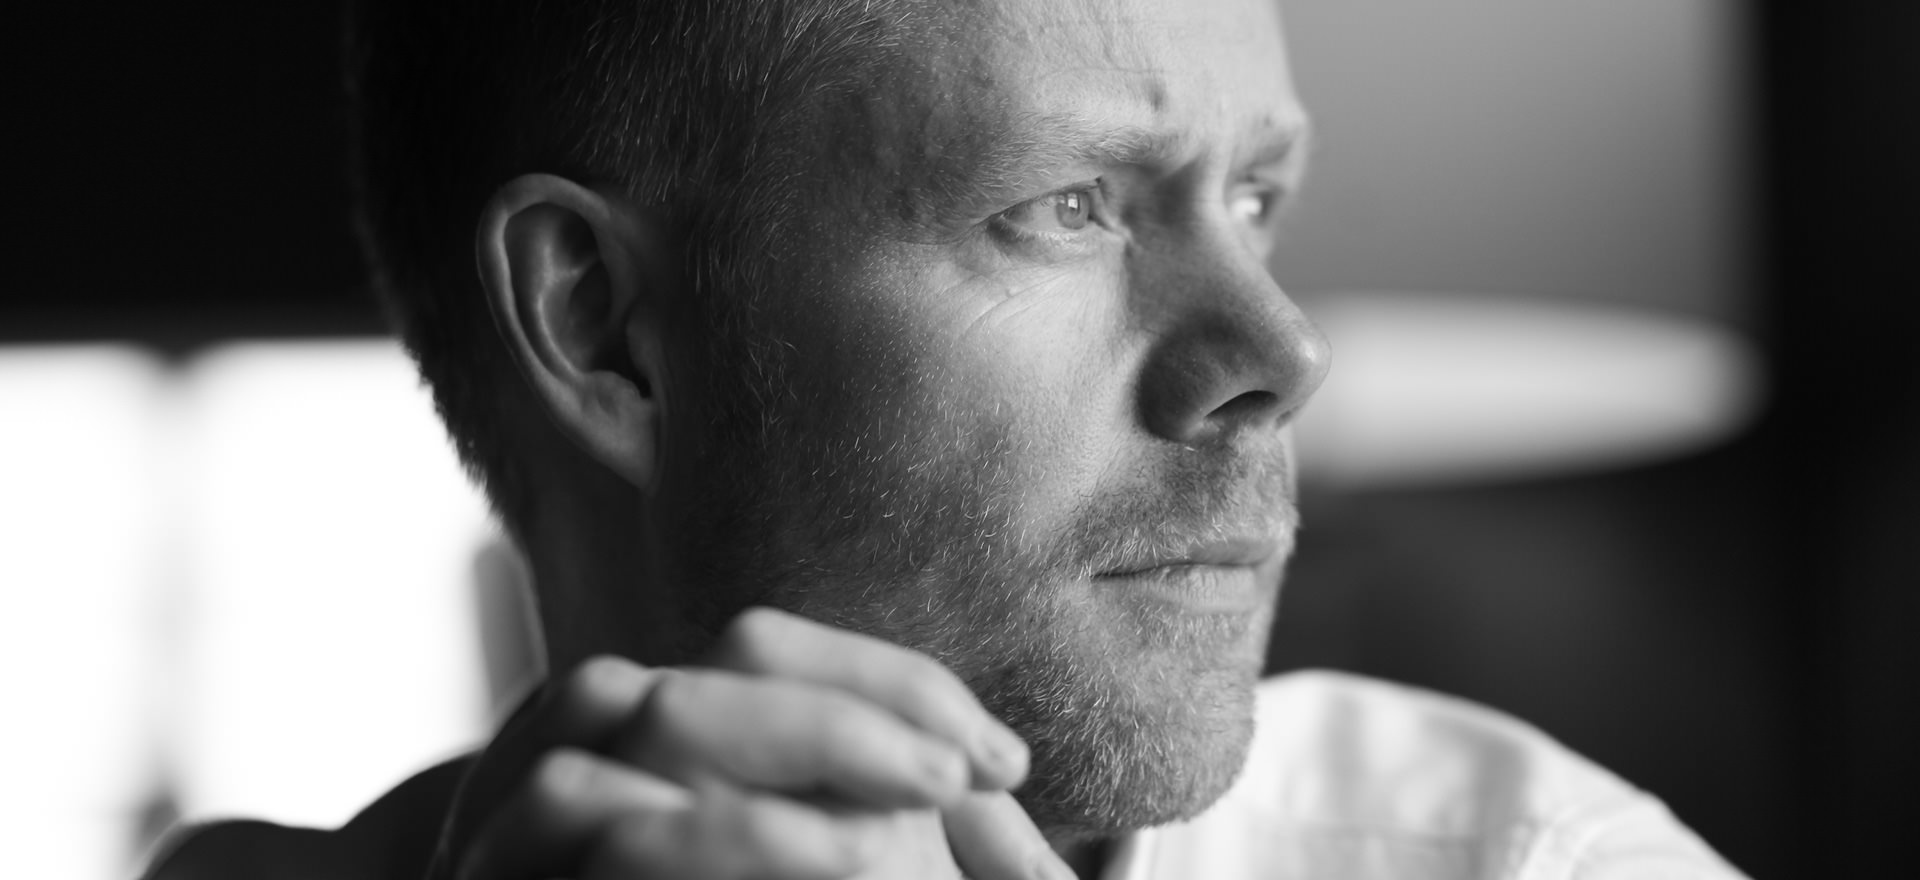 Max Richter: Composing for Sleep | Native Instruments Blog